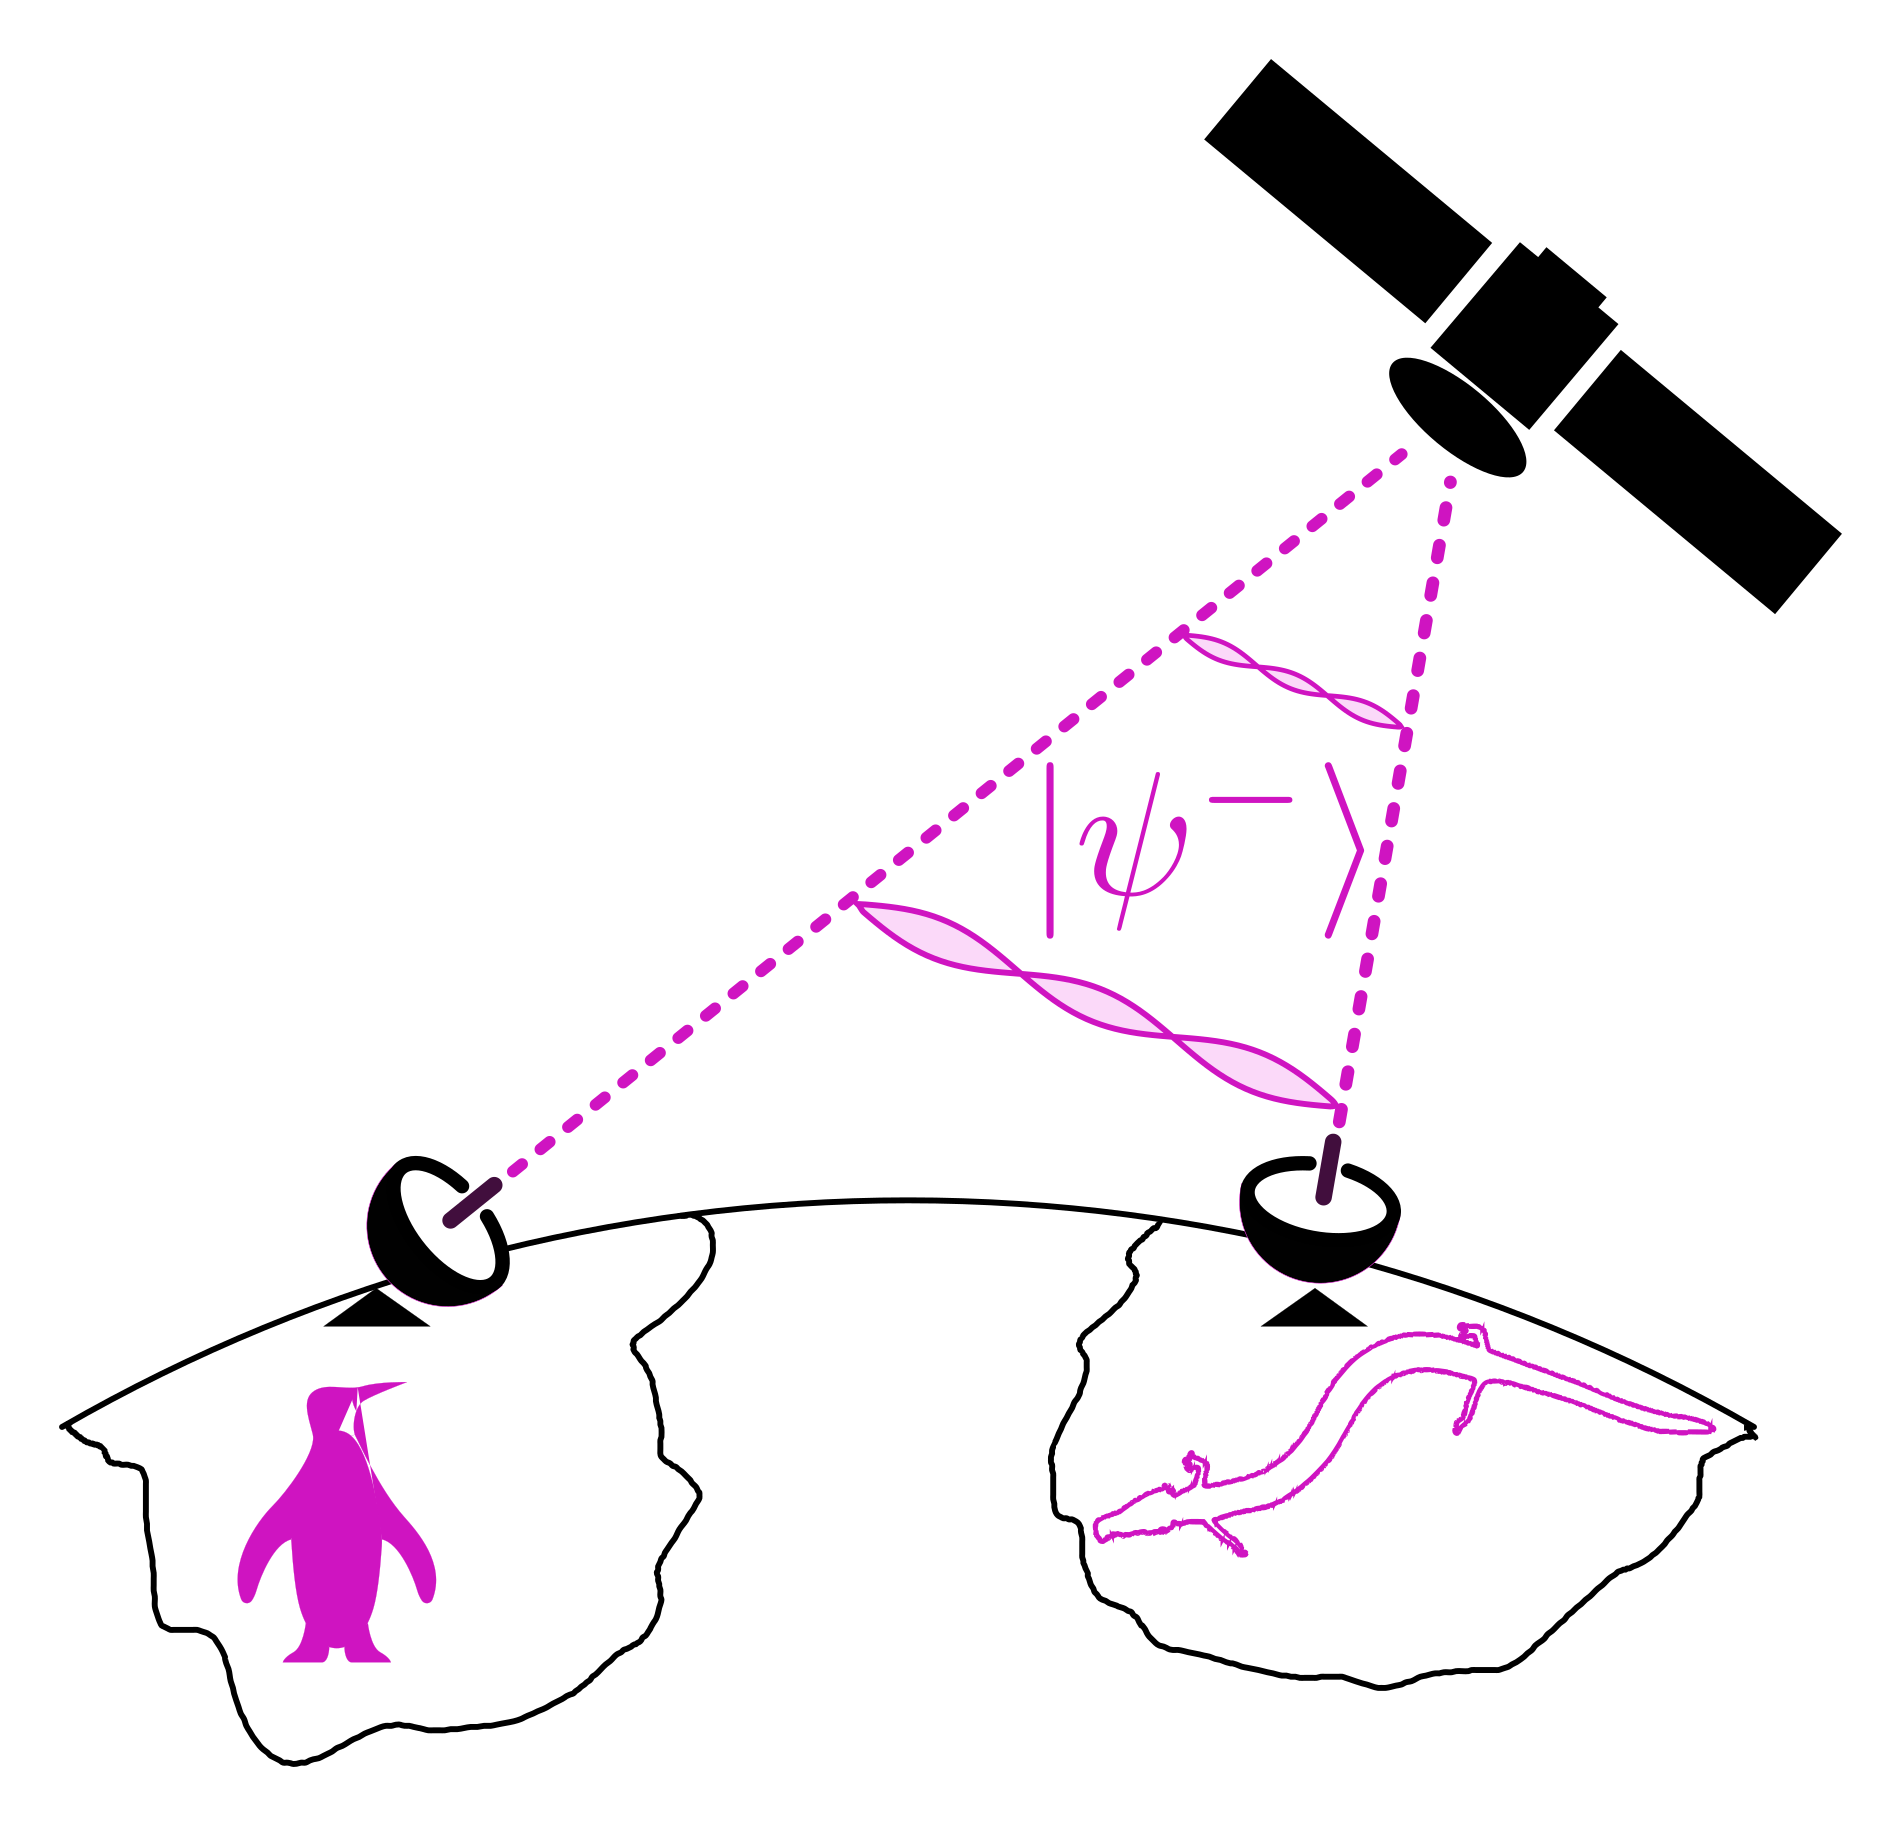 Schematic of entanglement distribution via space.